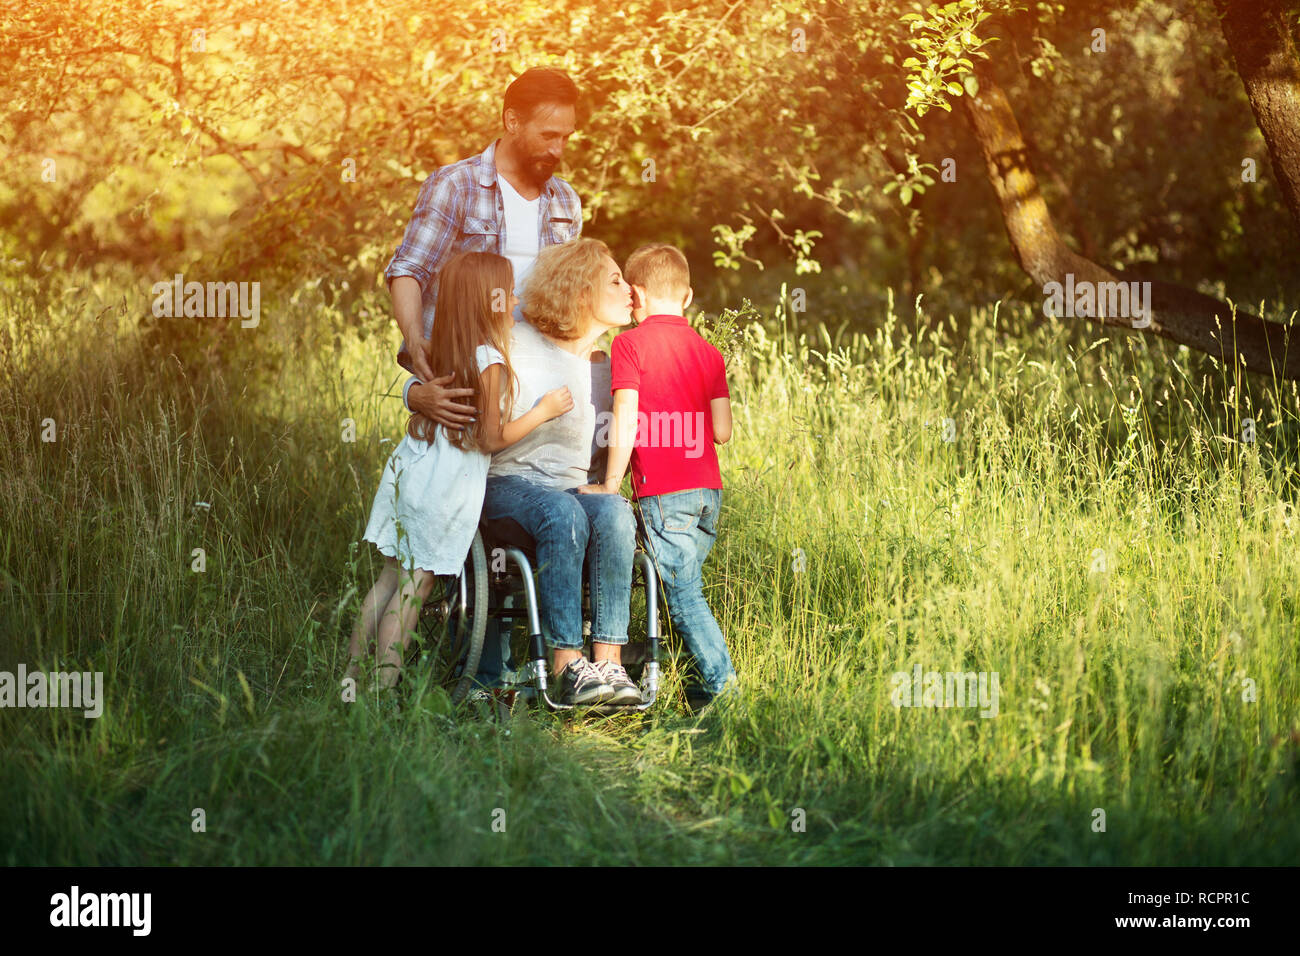 Woman in wheelchair kisses her son among family members Stock Photo